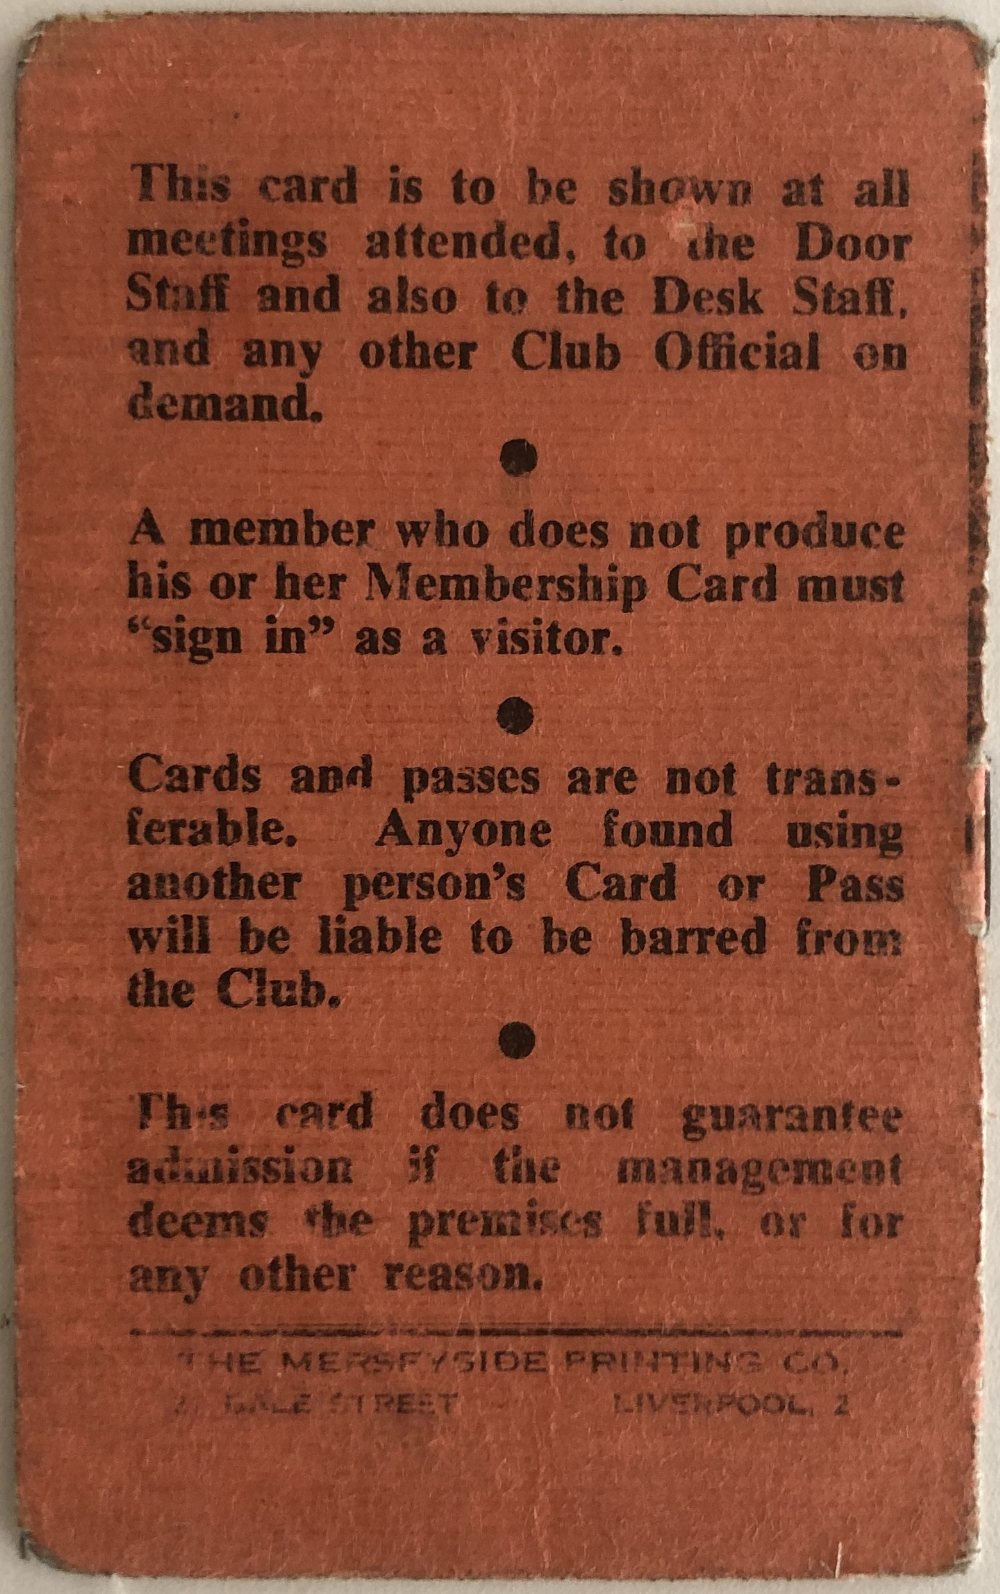 CAVERN 1963 MEMBERSHIP CARD. Another nice example this time from 1963. - Image 2 of 4